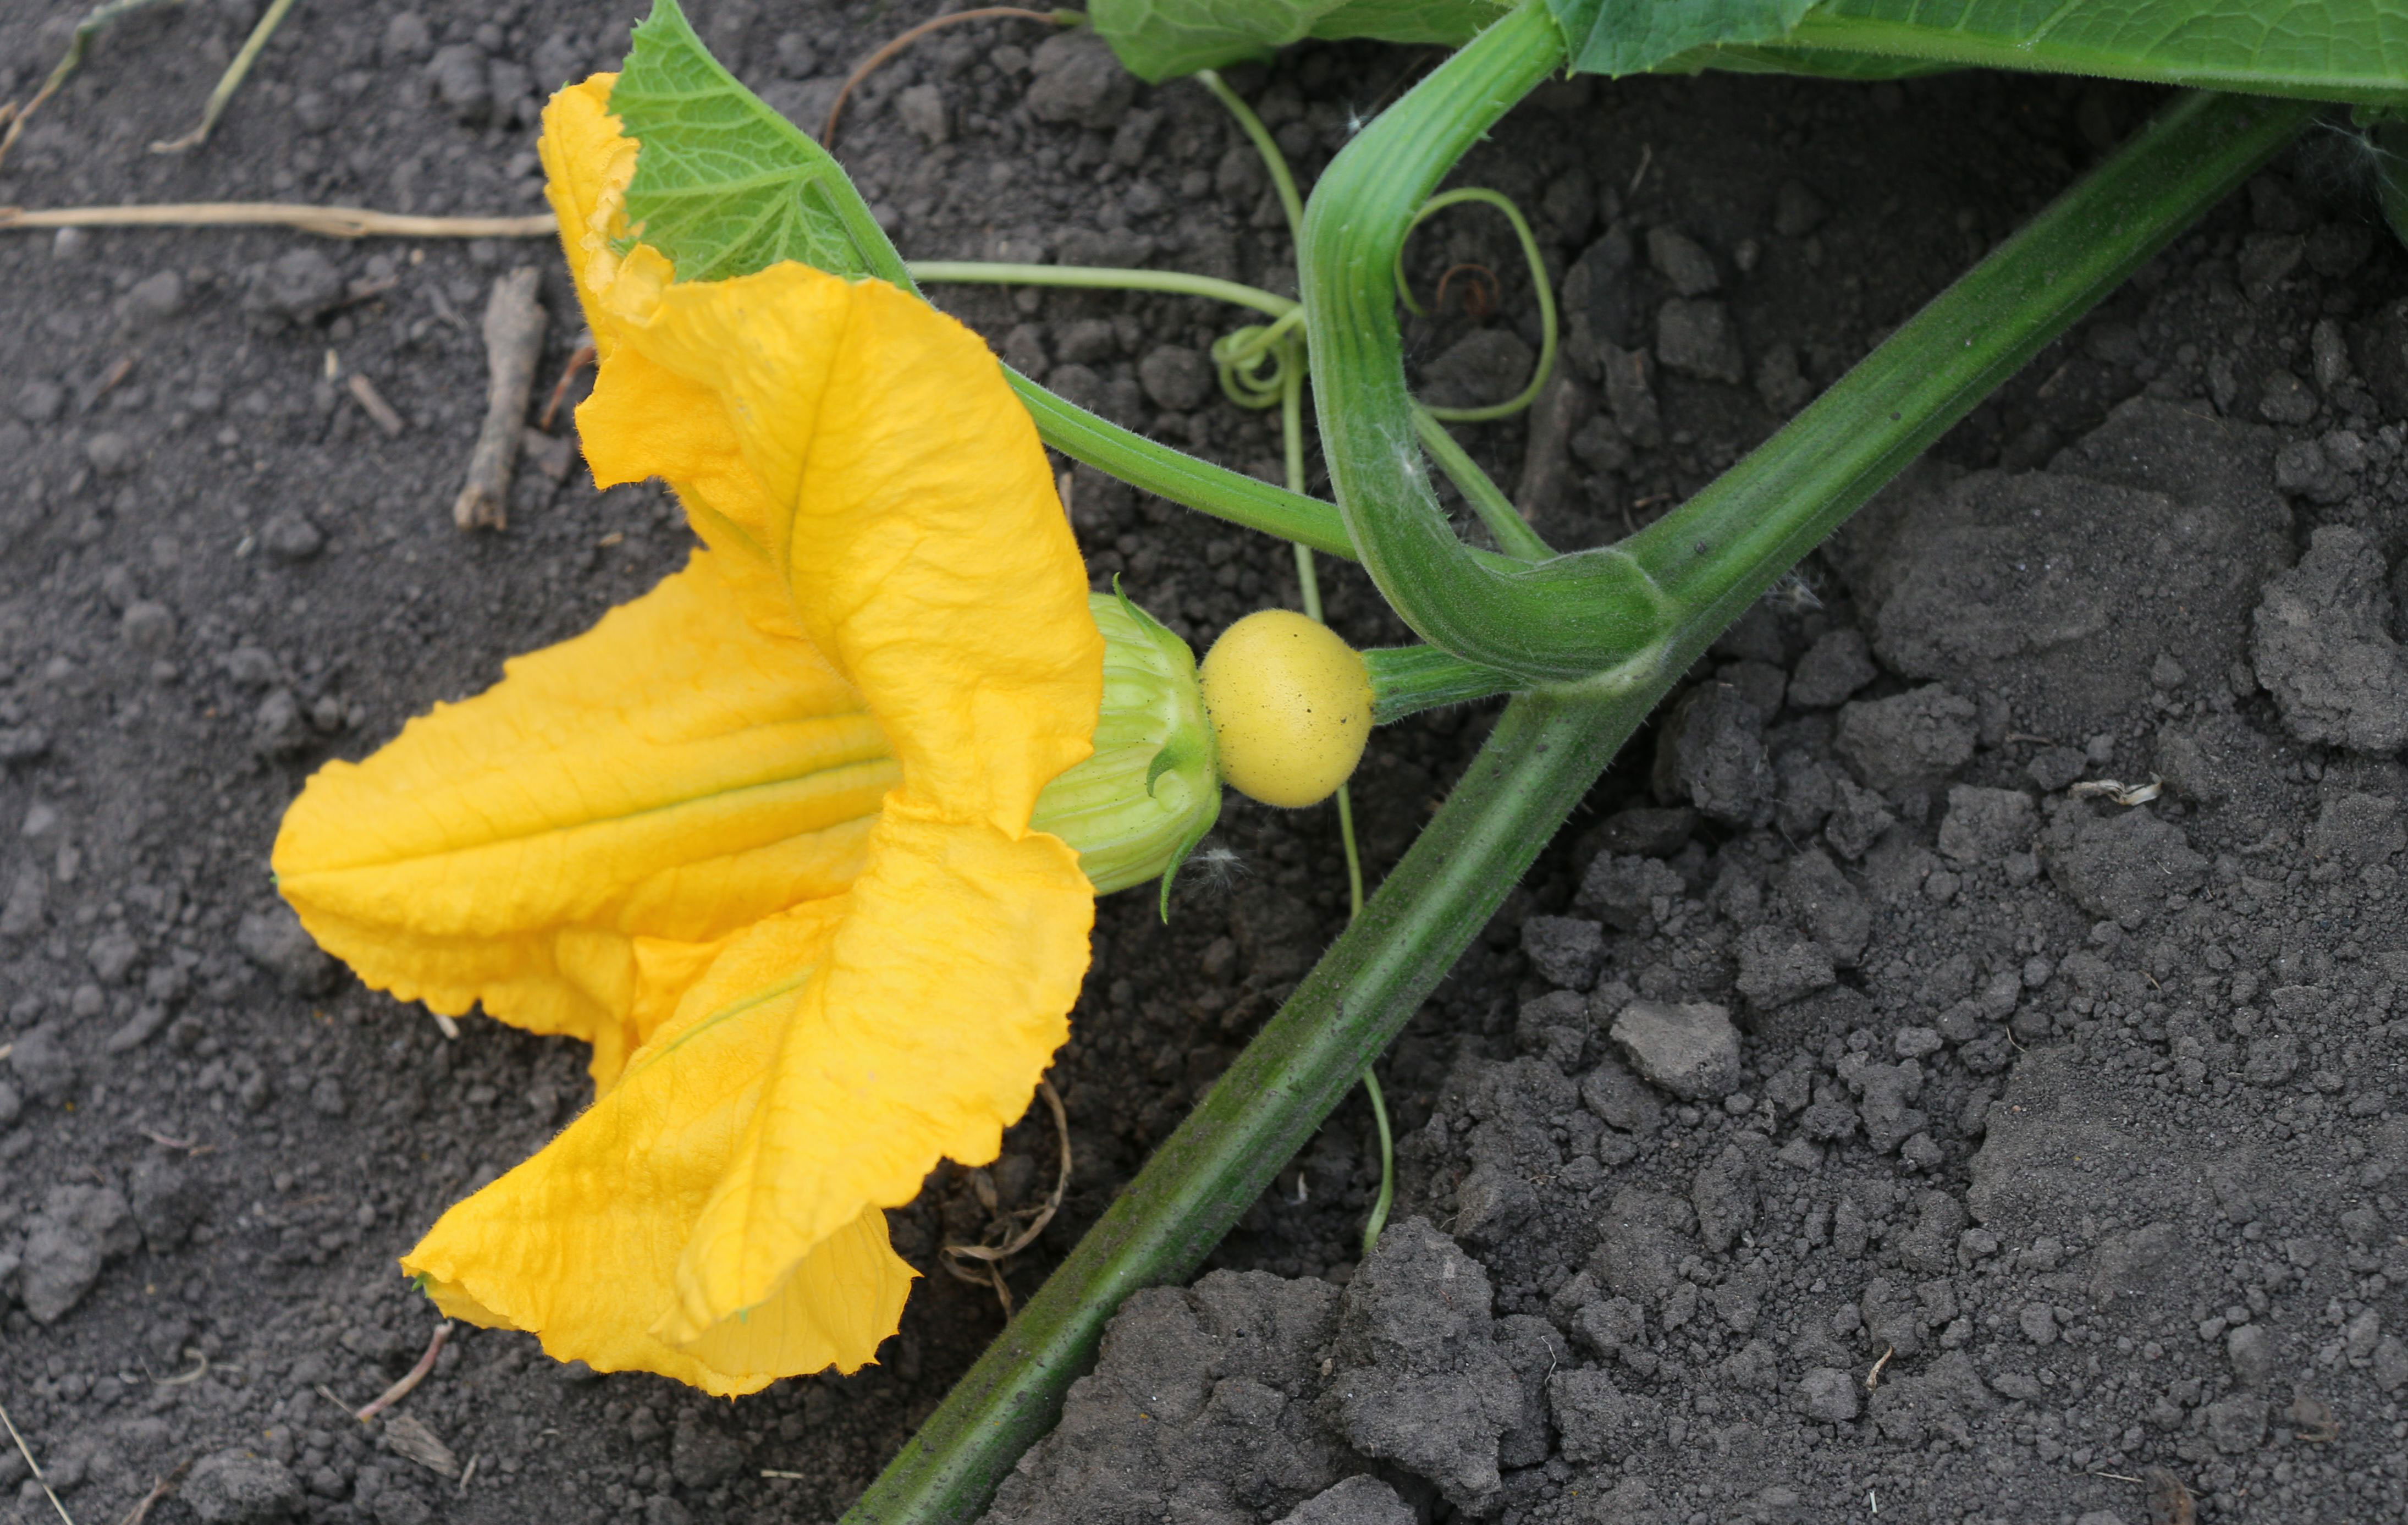 A green squash vine with a large, yellow flower blooming from it.